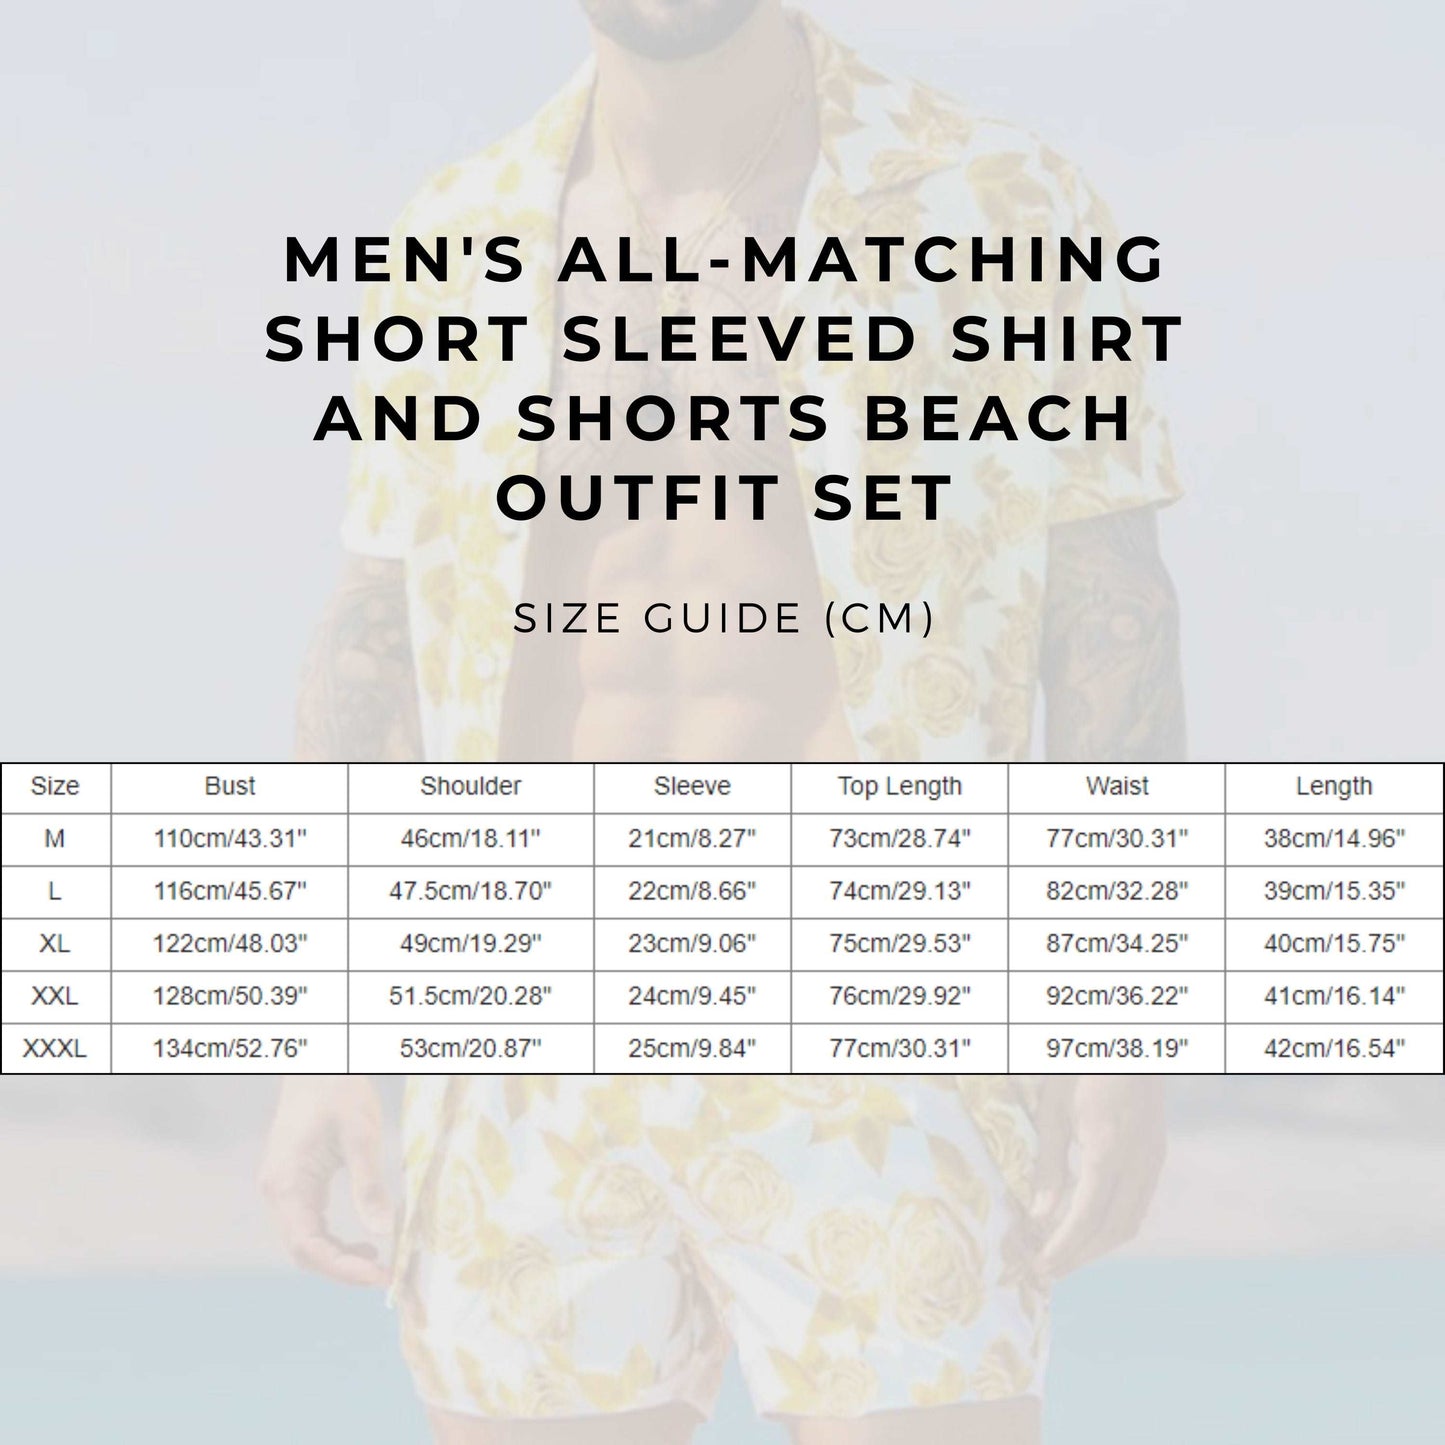 Men's All-matching Short Sleeved Shirt and Shorts Beach Outfit Set size